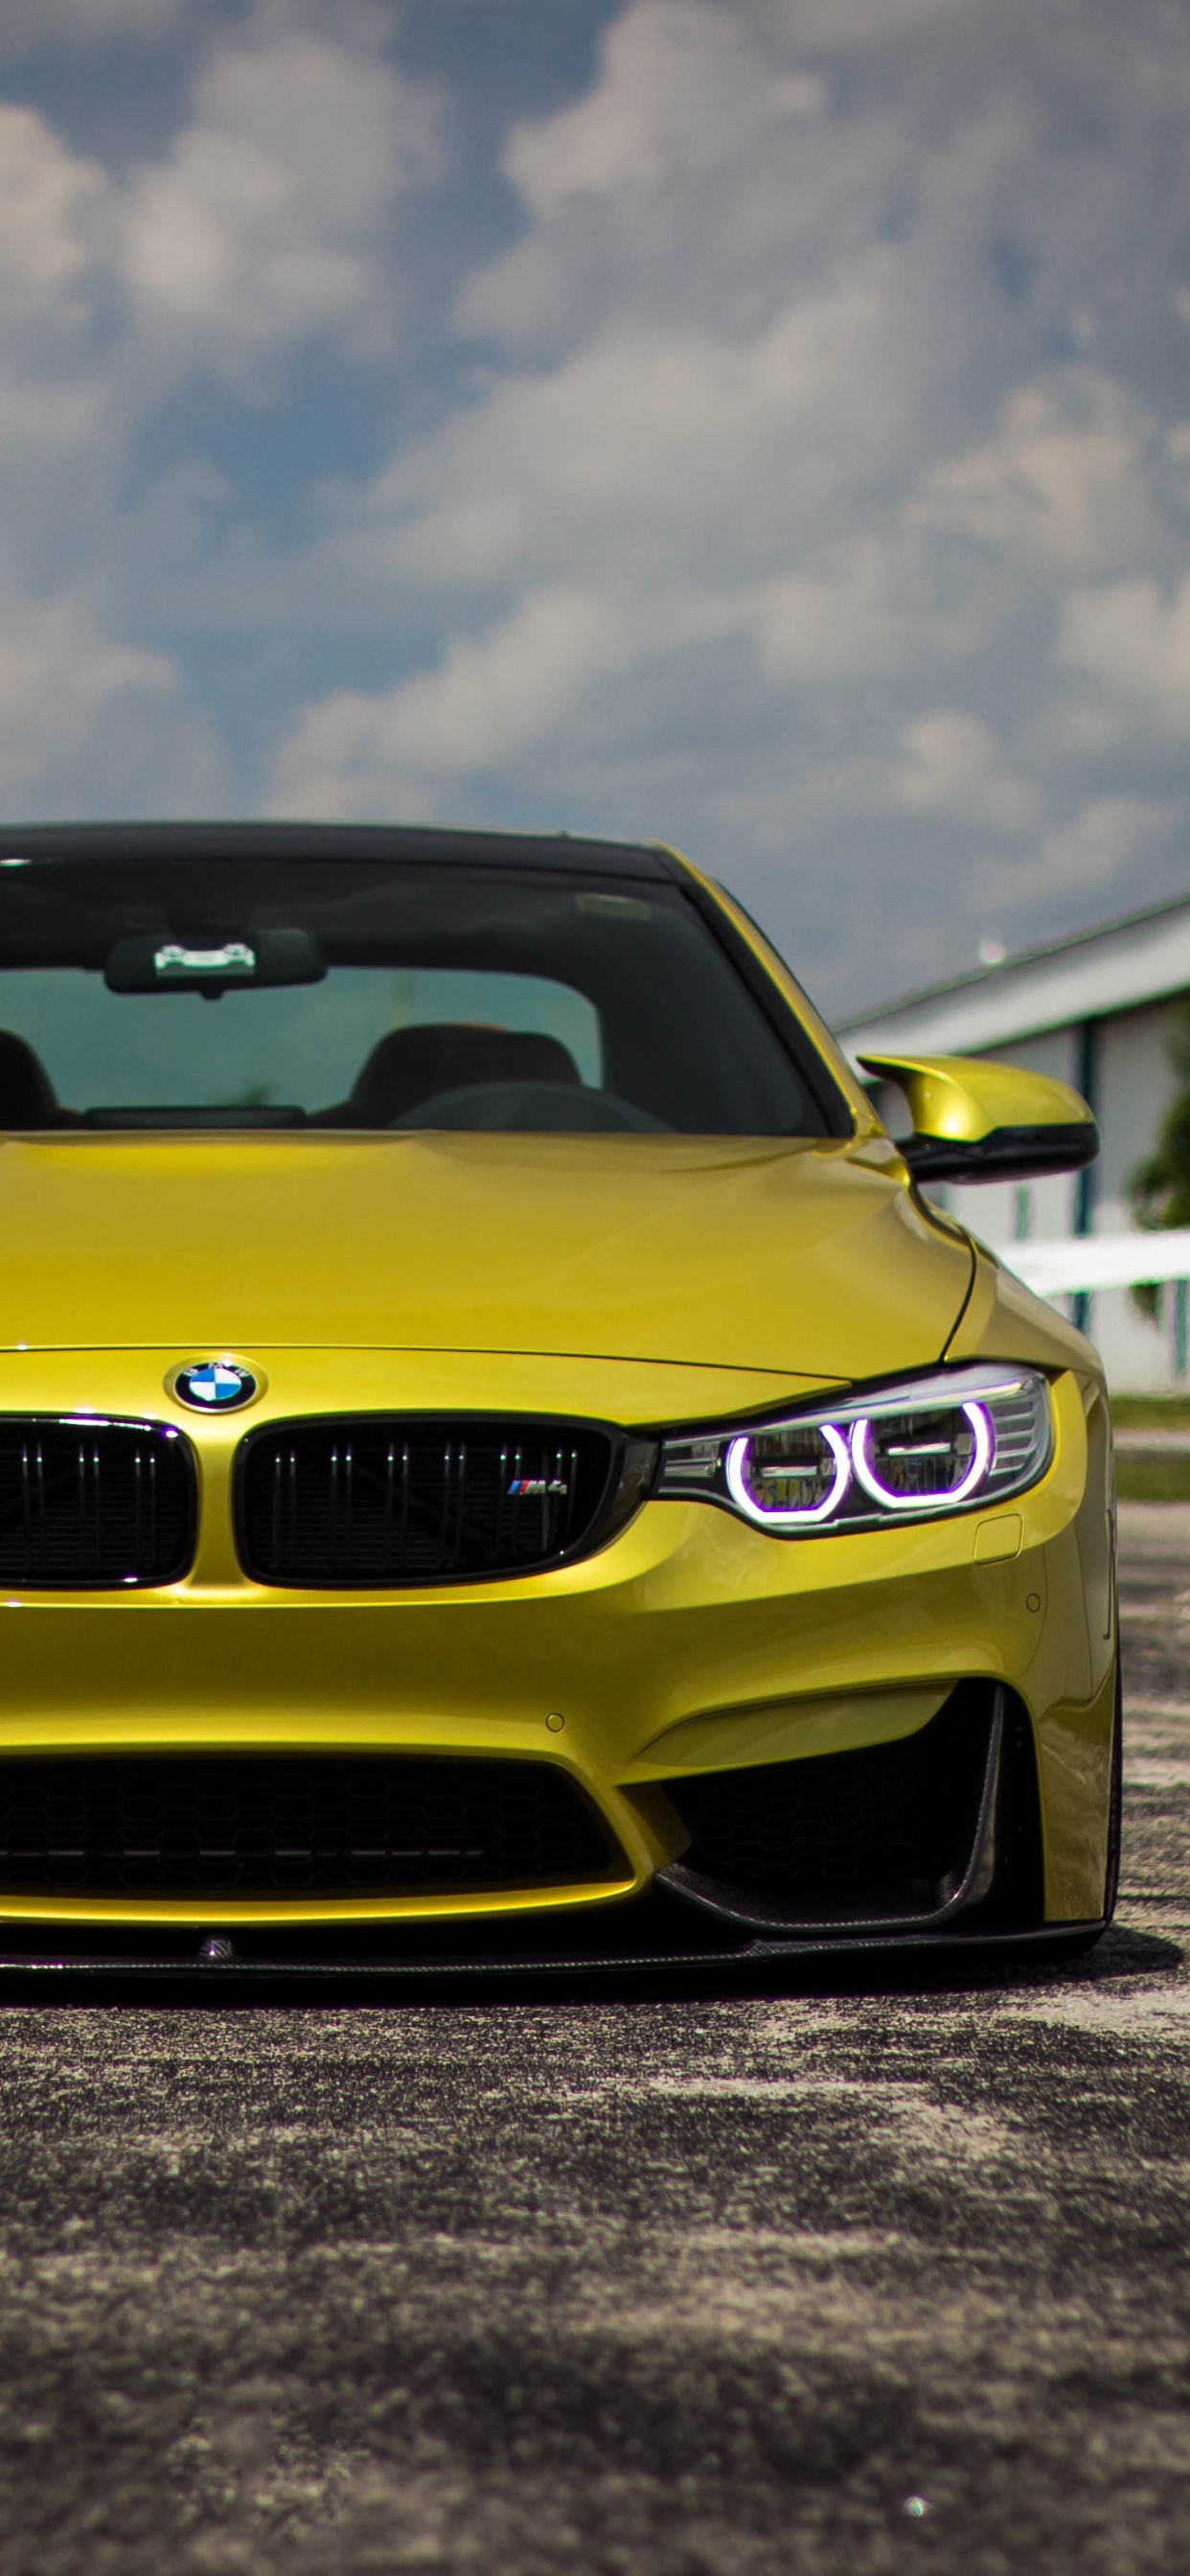 Yellow Bmw m 3 on Road During Daytime. Wallpaper in 1242x2688 Resolution